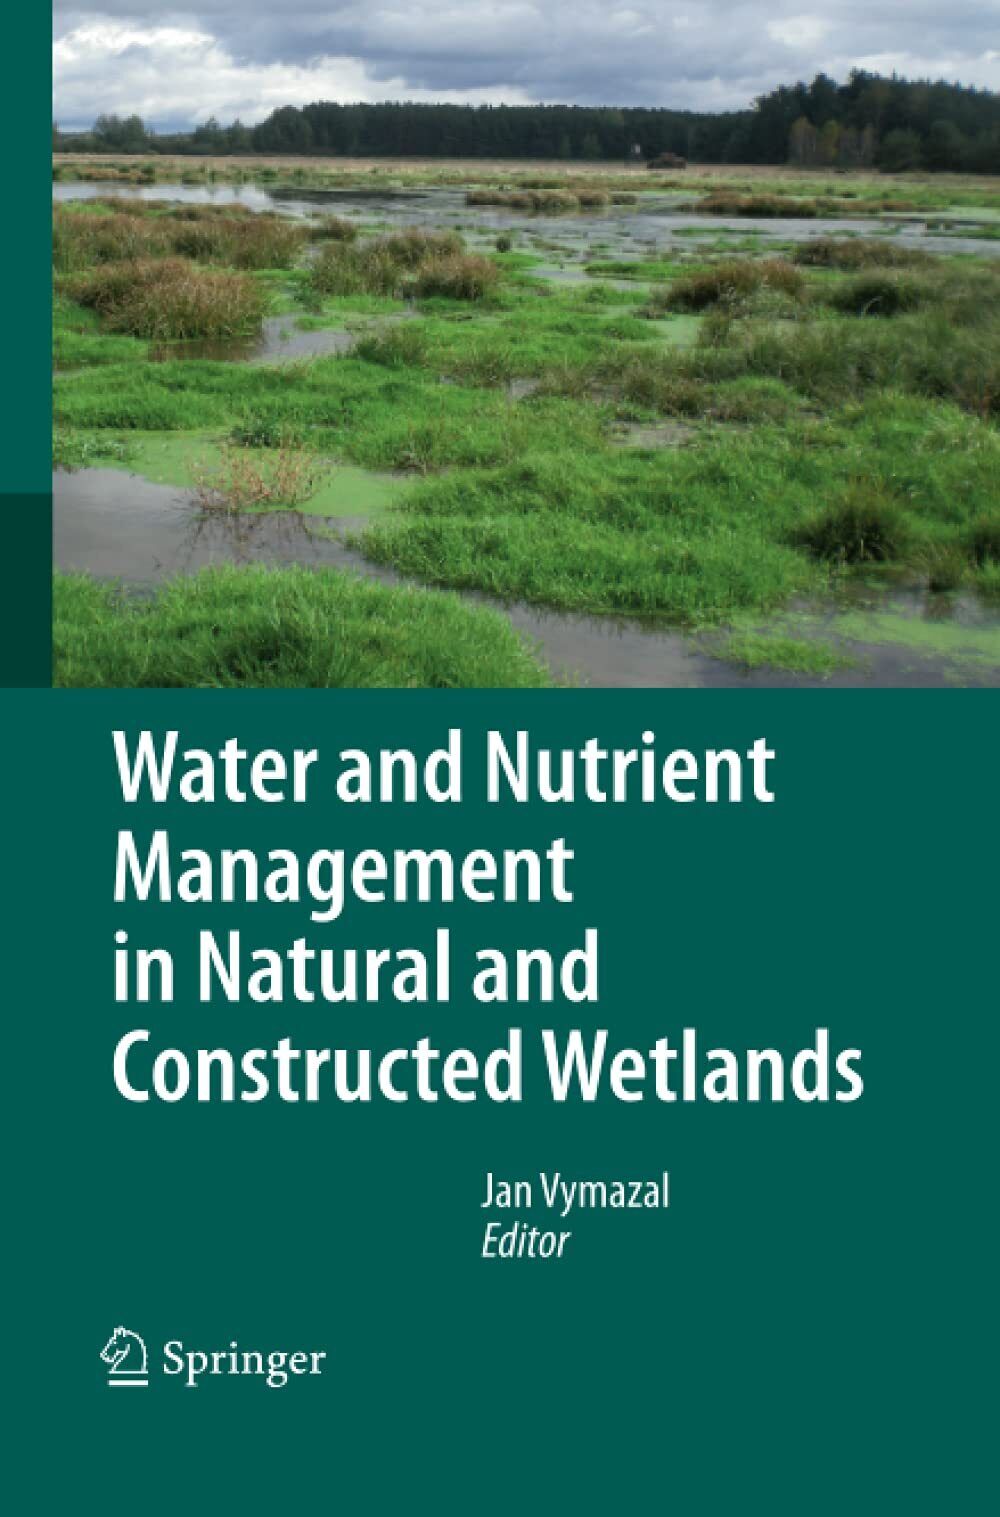 Water and Nutrient Management in Natural and Constructed Wetlands -Springer,2014